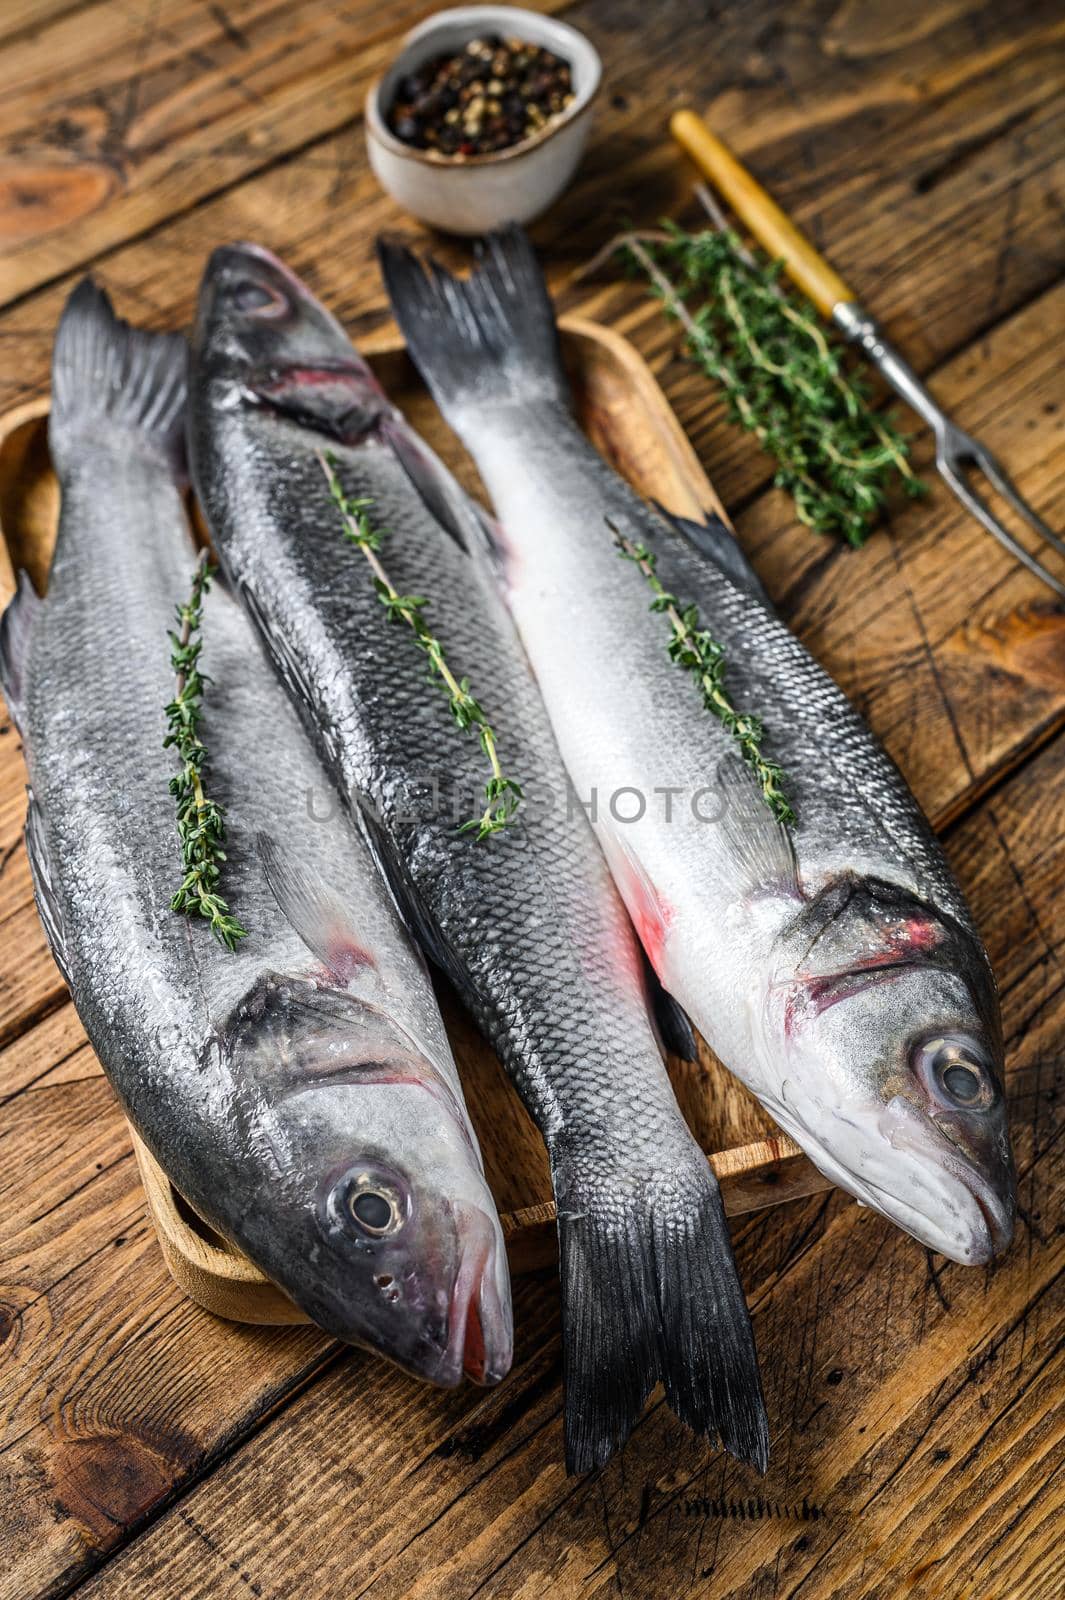 Raw seabass fish on a tray. wooden background. Top view by Composter